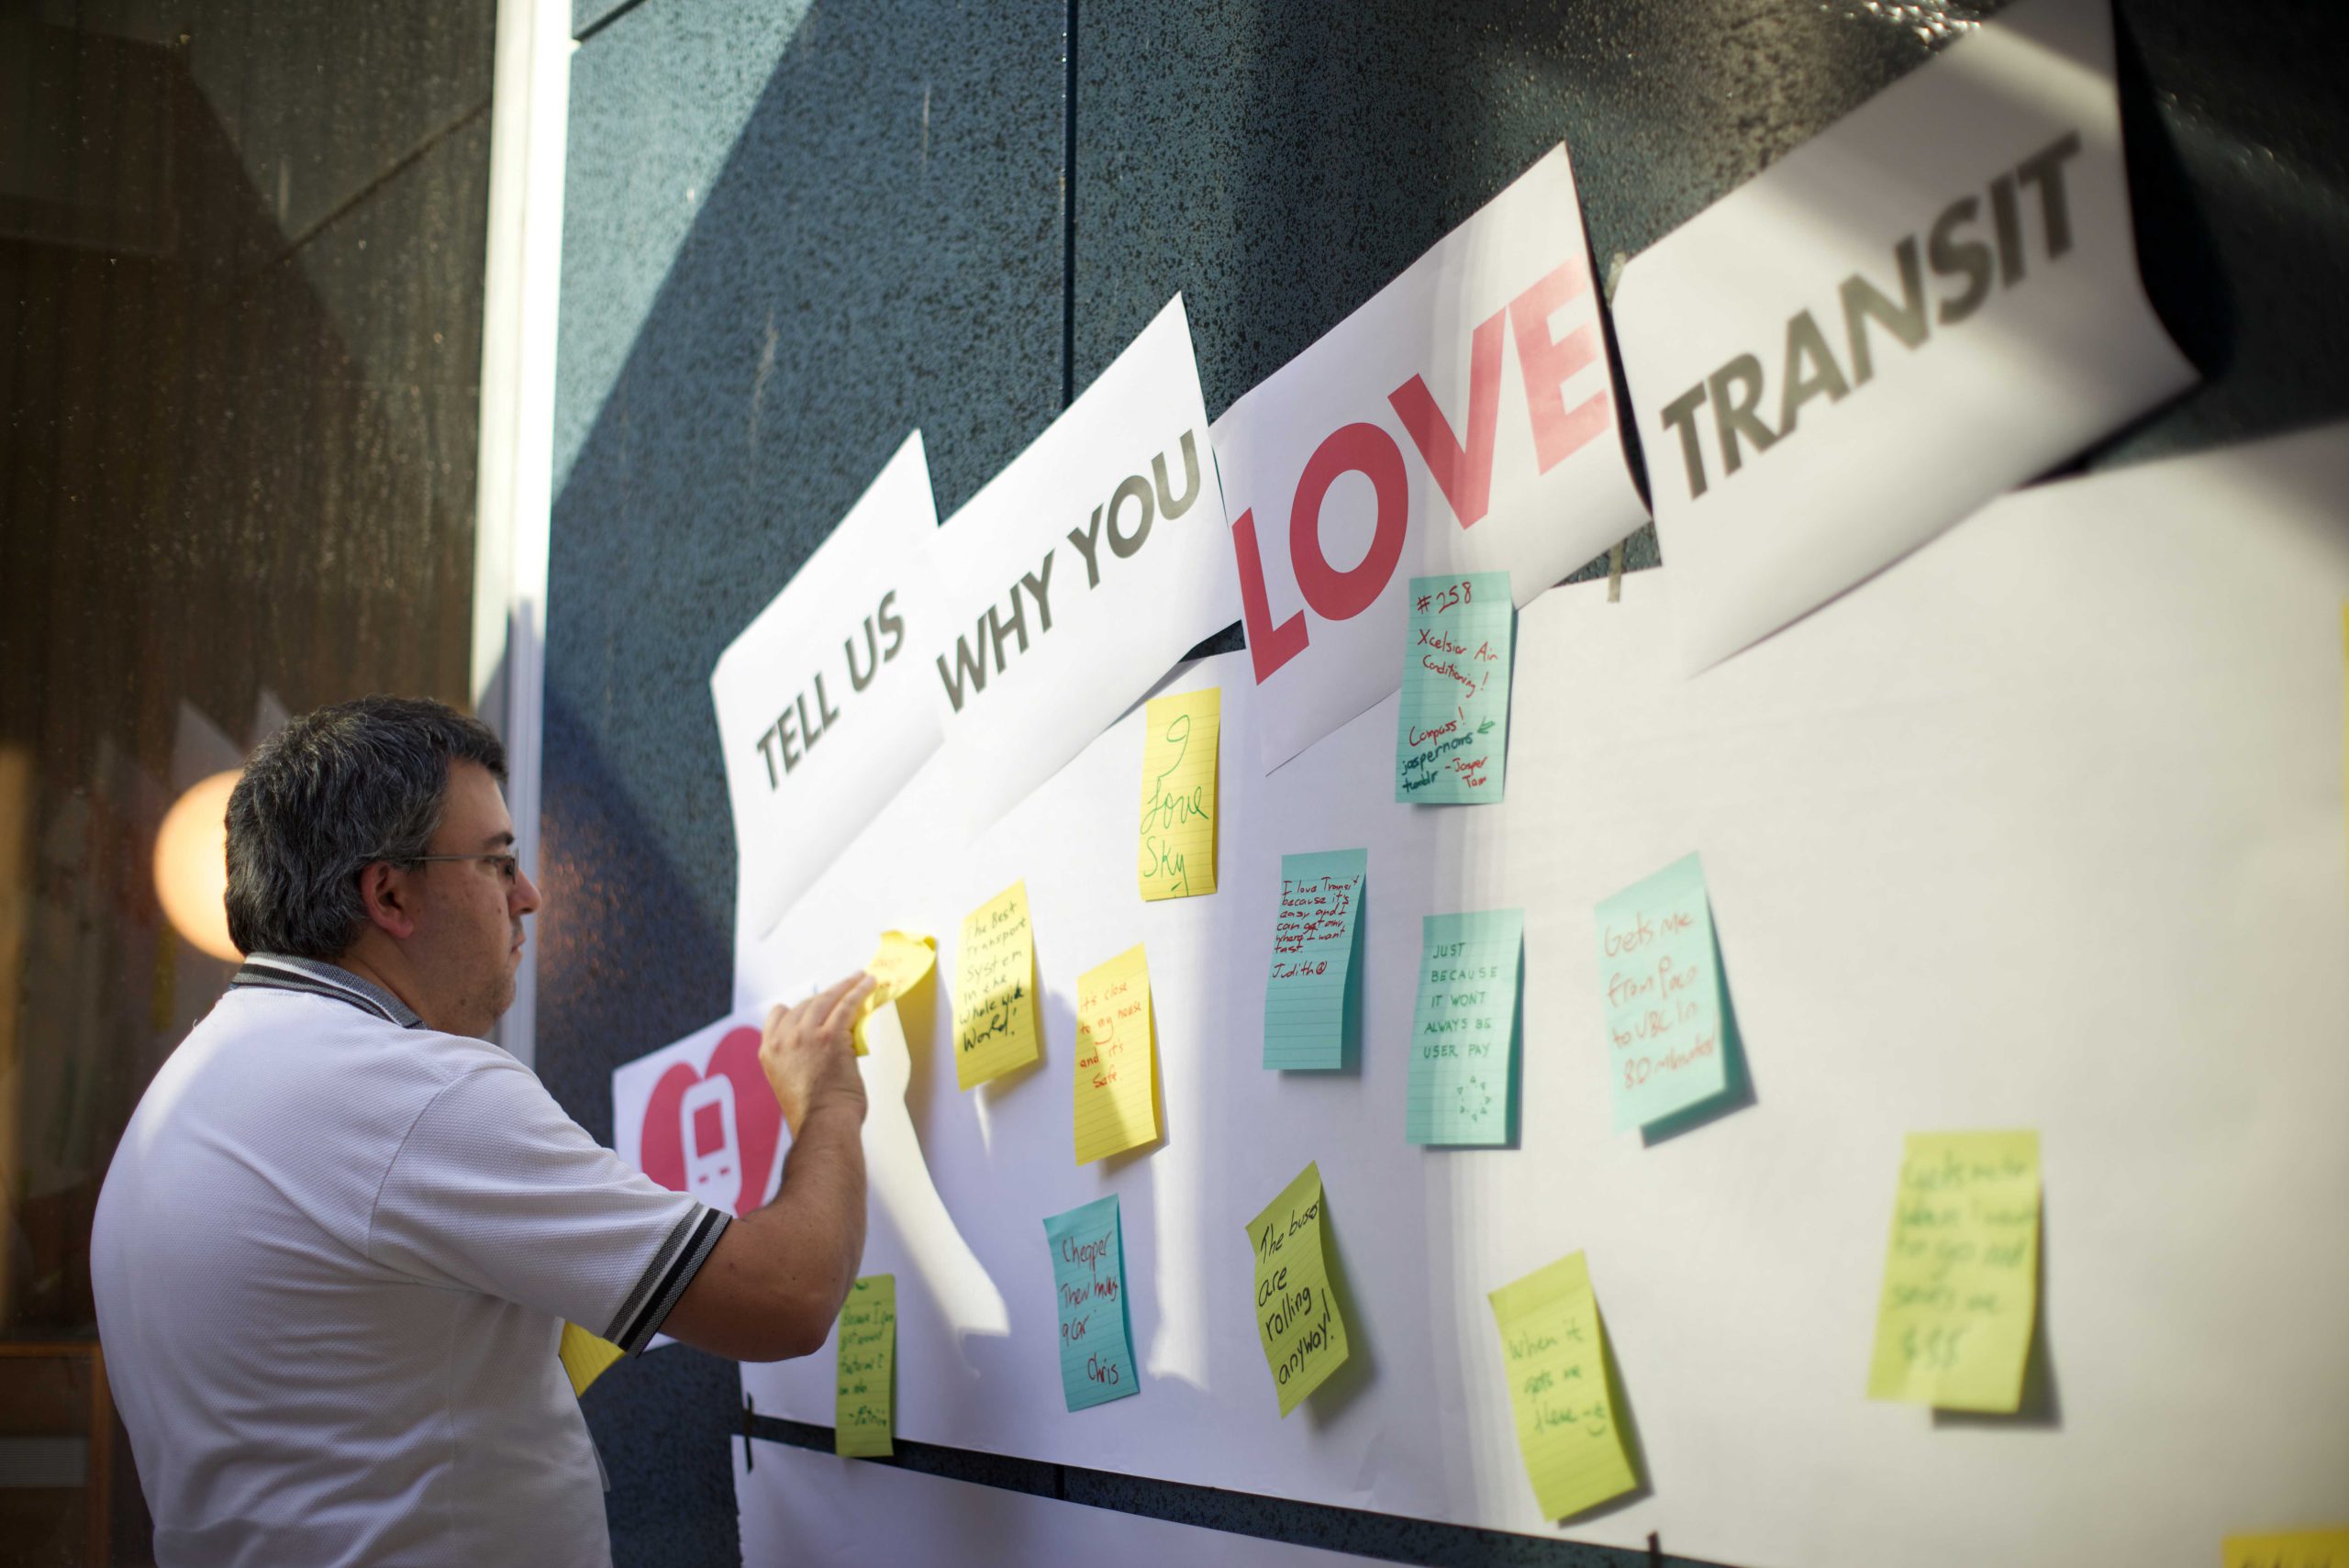 Tell us why you LOVE transit!